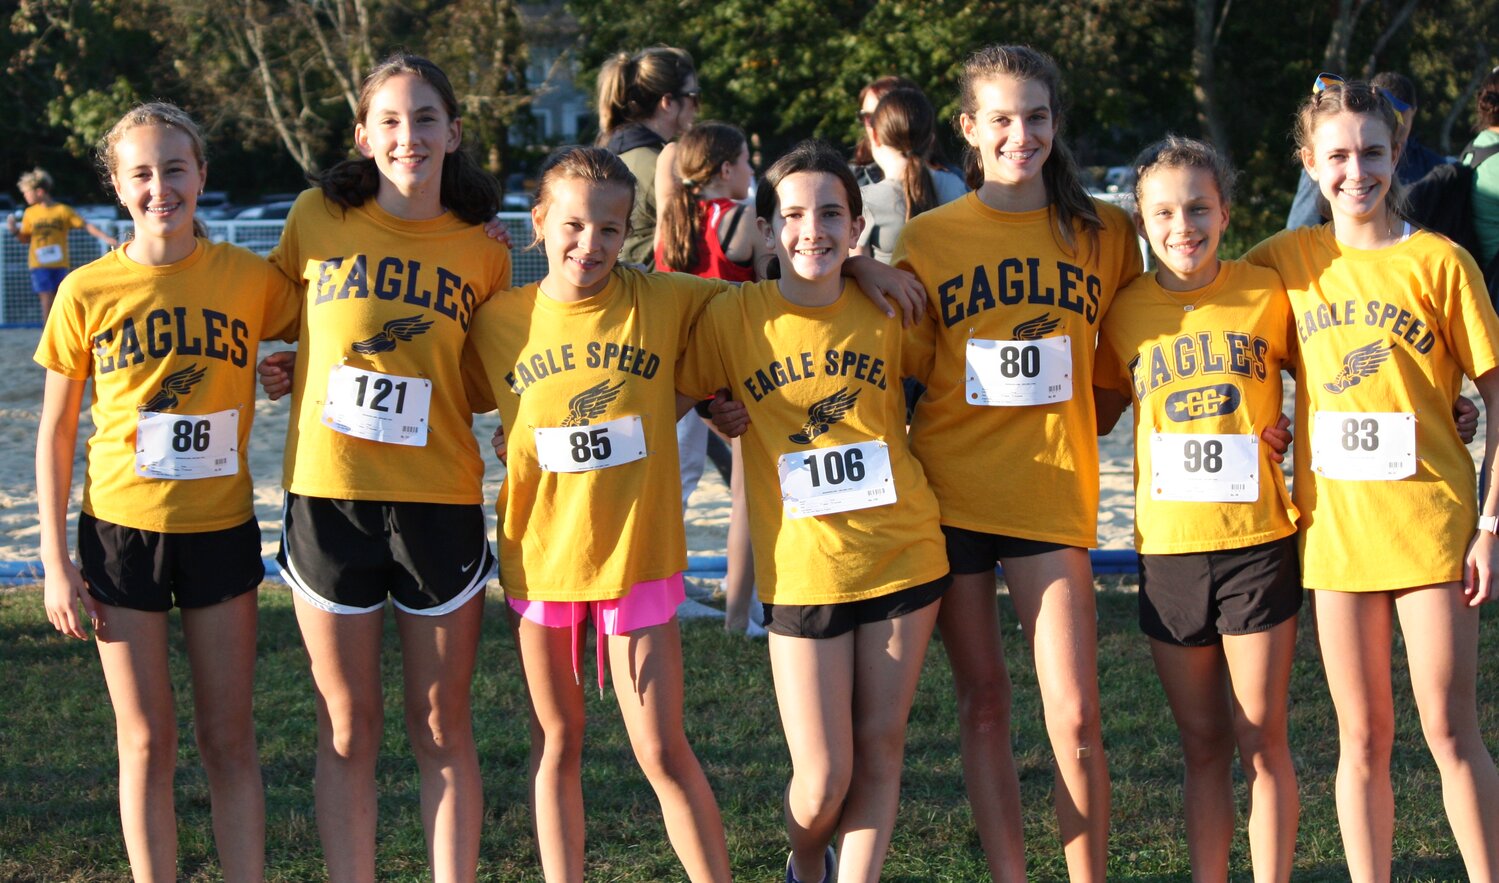 Before going on to win, members of the BMS Girls Varsity team Abby Glass, Caitie Wilbur, Garly Gill, Molly Reagan, Charlotte Farrell, Annabelle Meech and Gracie Gaines (from left to right) pose for a photo.